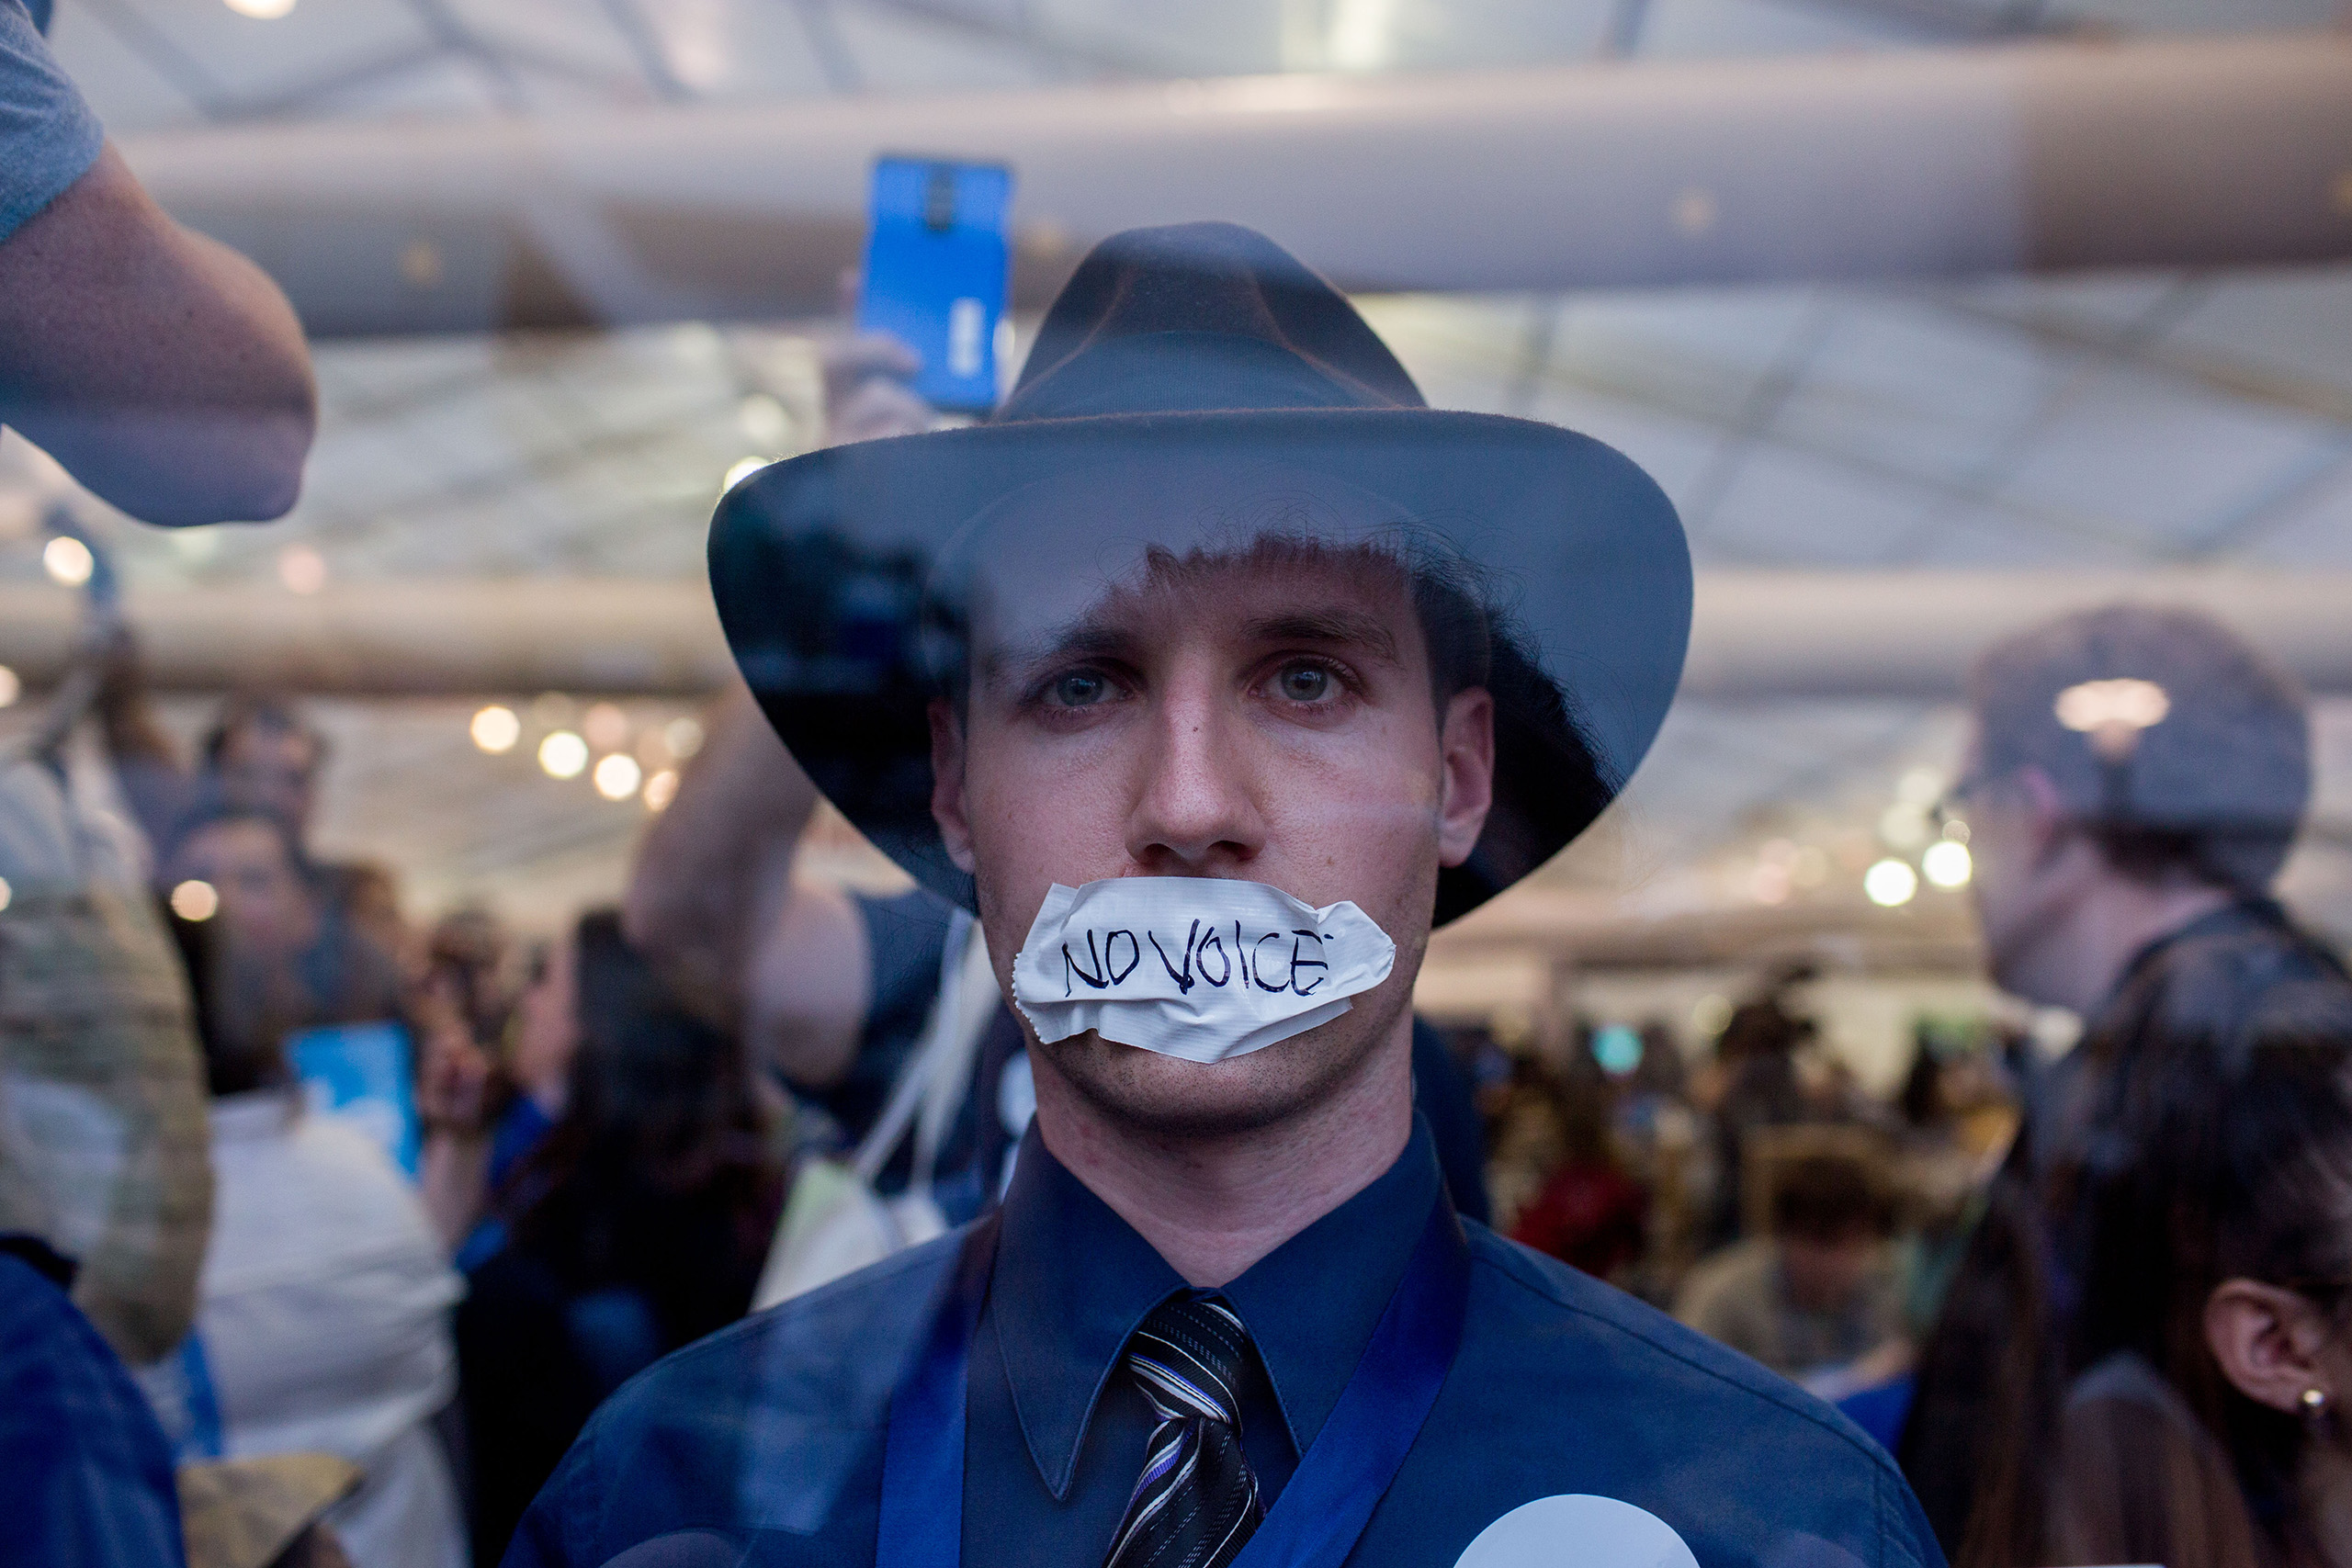 A supporter of Senator Bernie Sanders, holds a sign against the Trans-Pacific Partnership (TPP) while demonstrating inside the media tent during the Democratic National Convention on Tuesday, July 26, 2016 in Philadelphia, Pennsylvania.